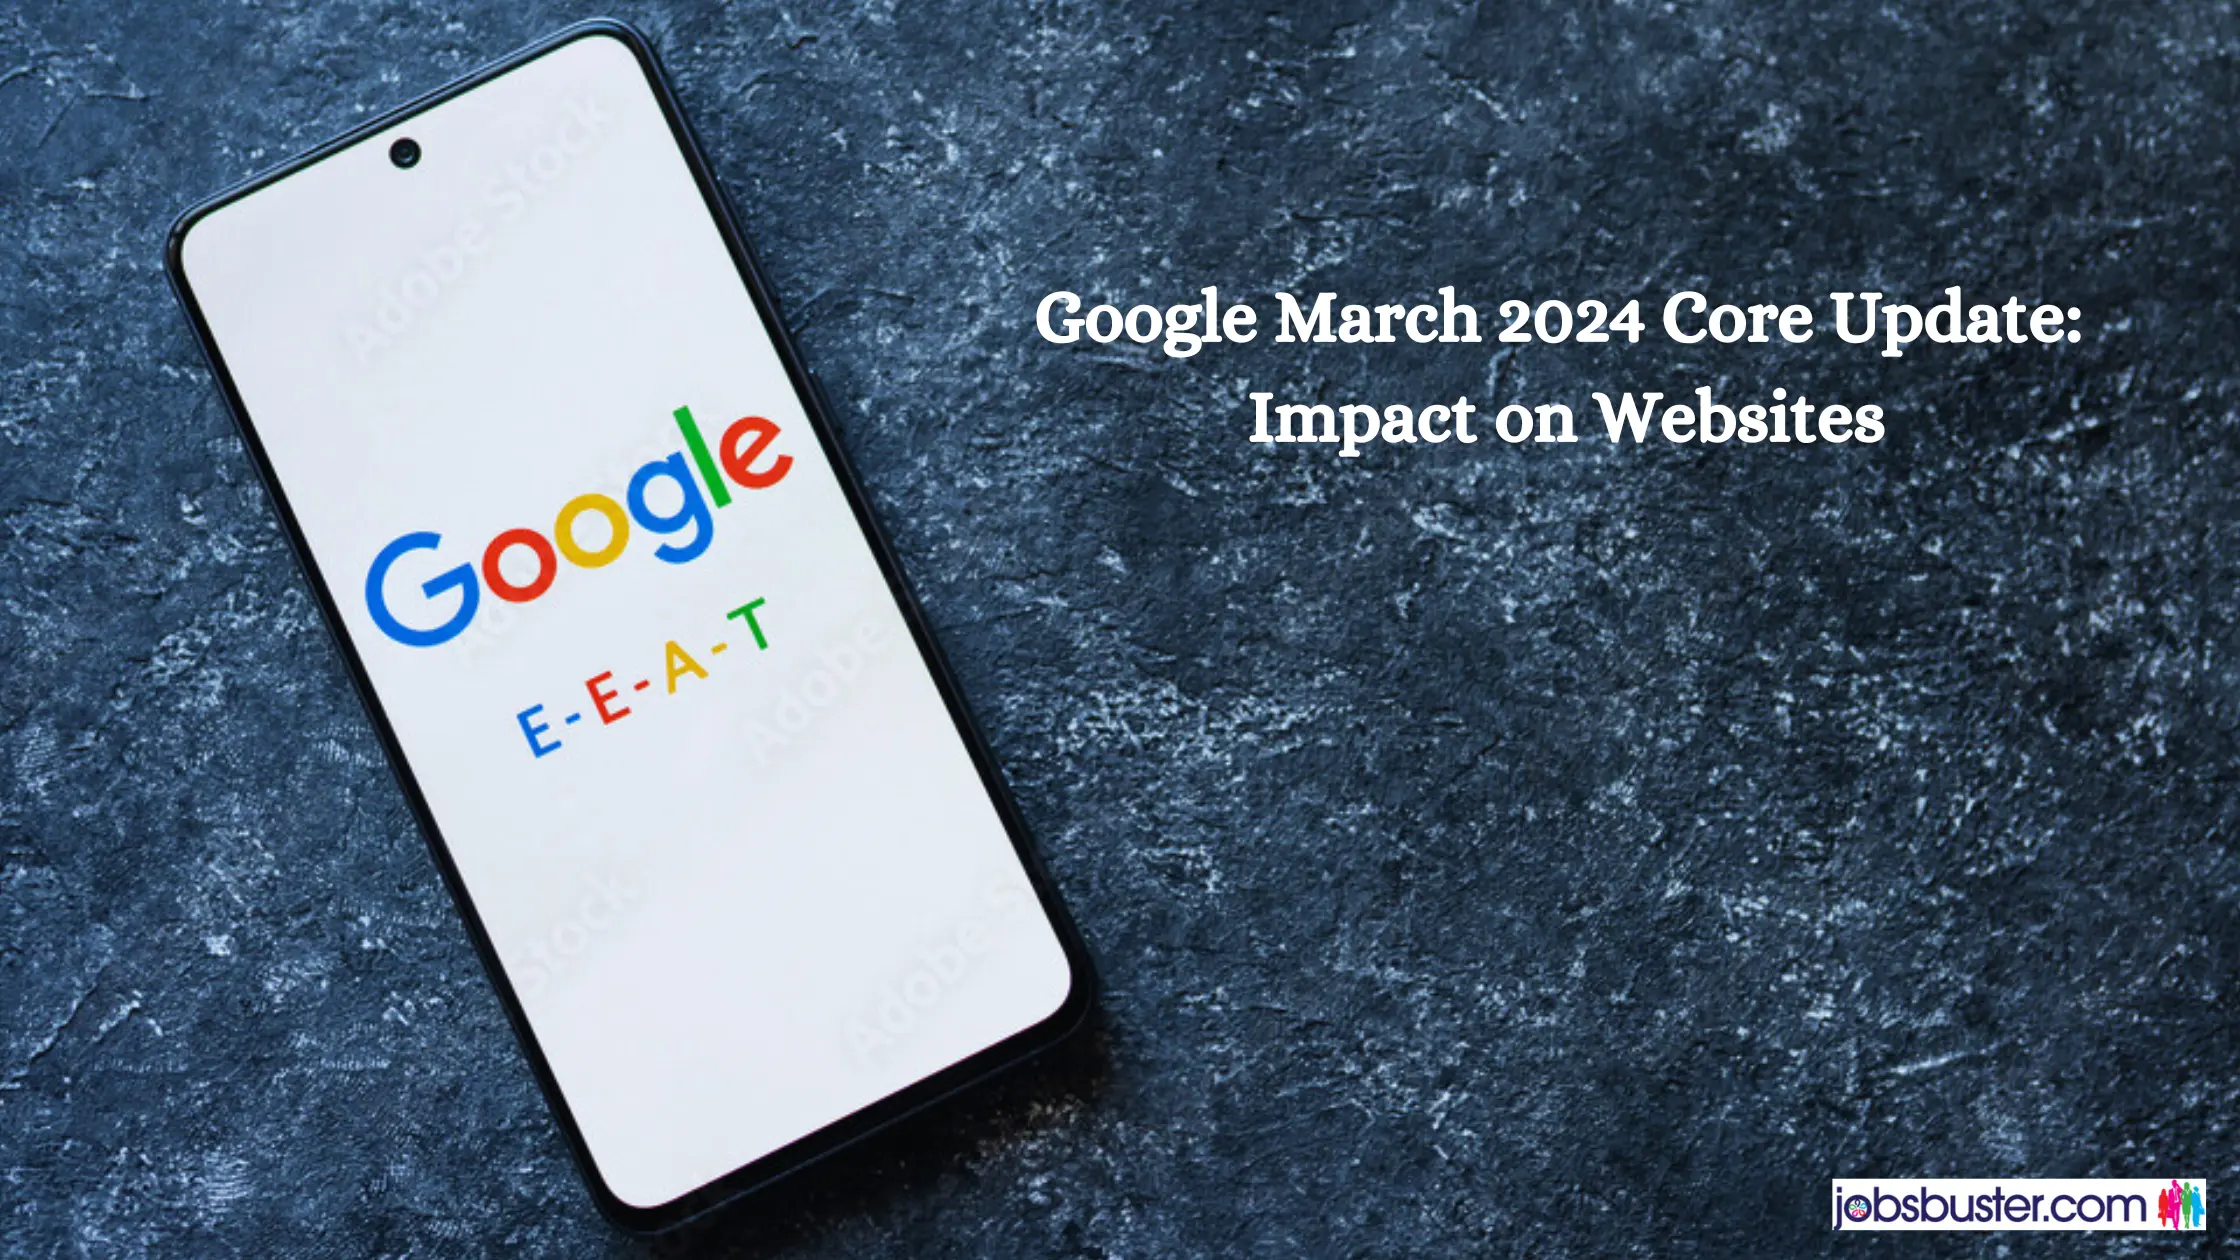 Google March 2024 Core Update: Impact on Websites